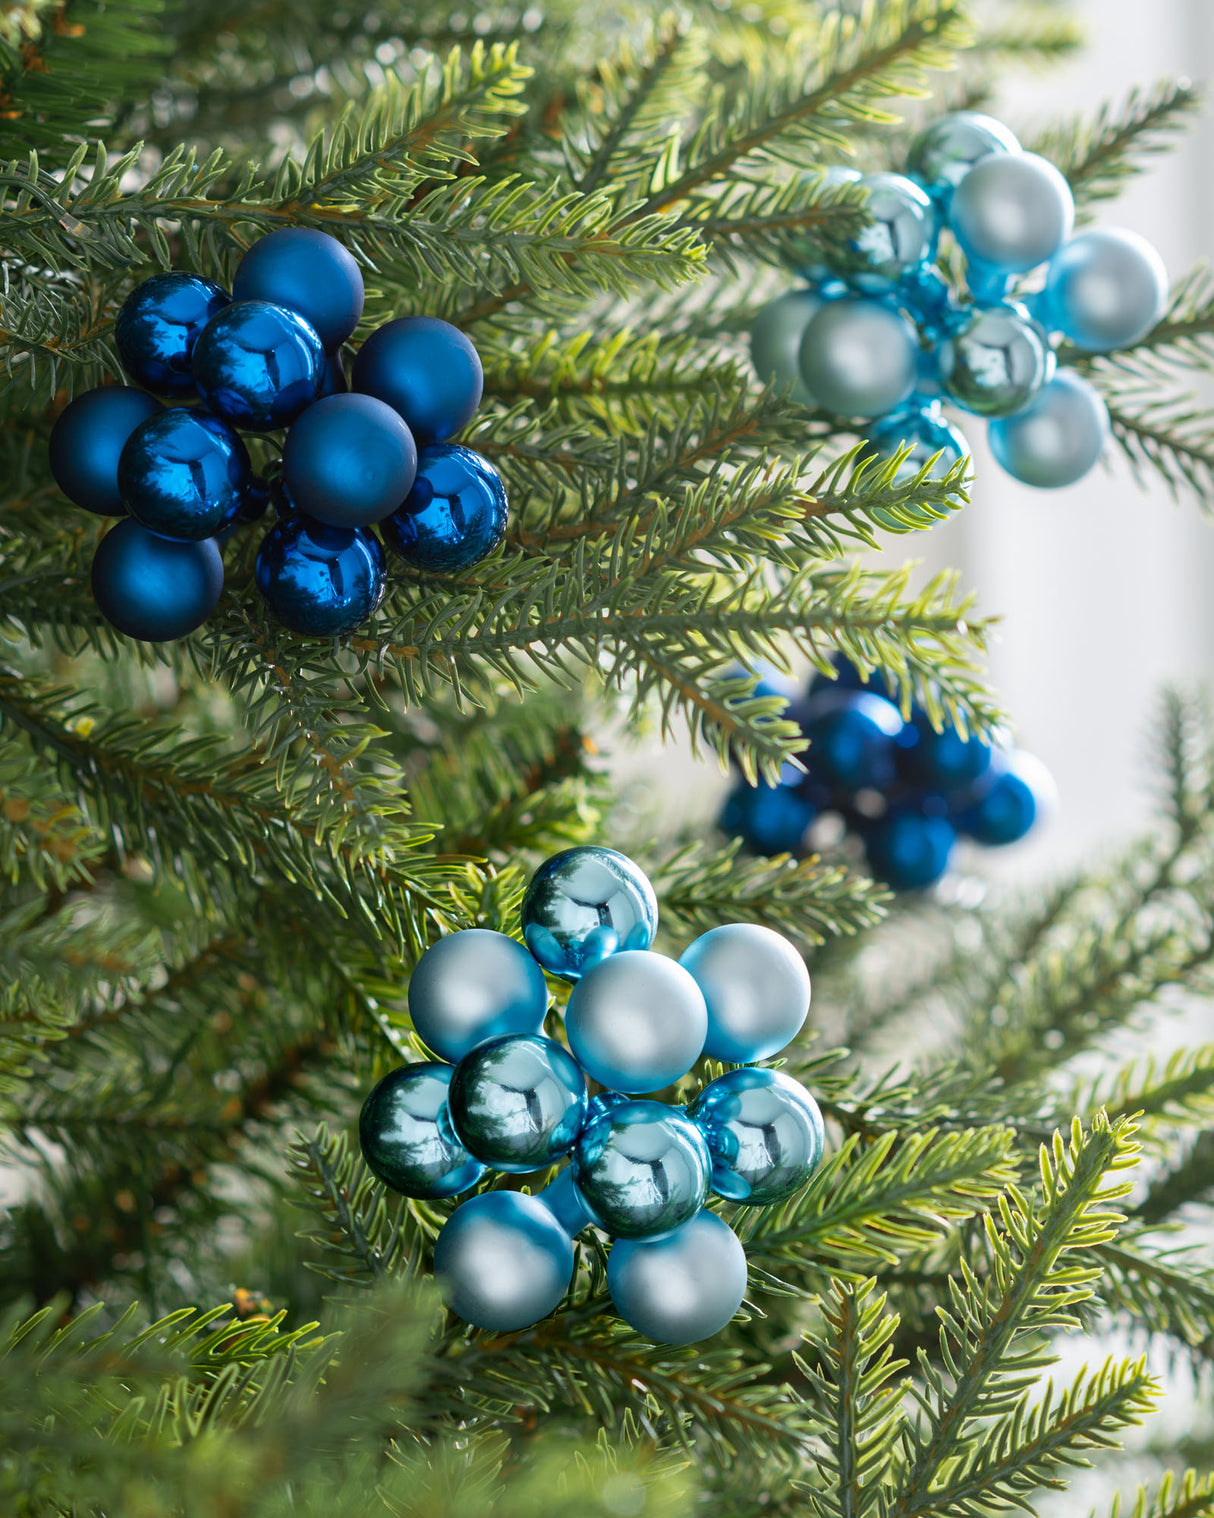 Antarctica Blue Glass Berry Cluster Baubles, 5 pack